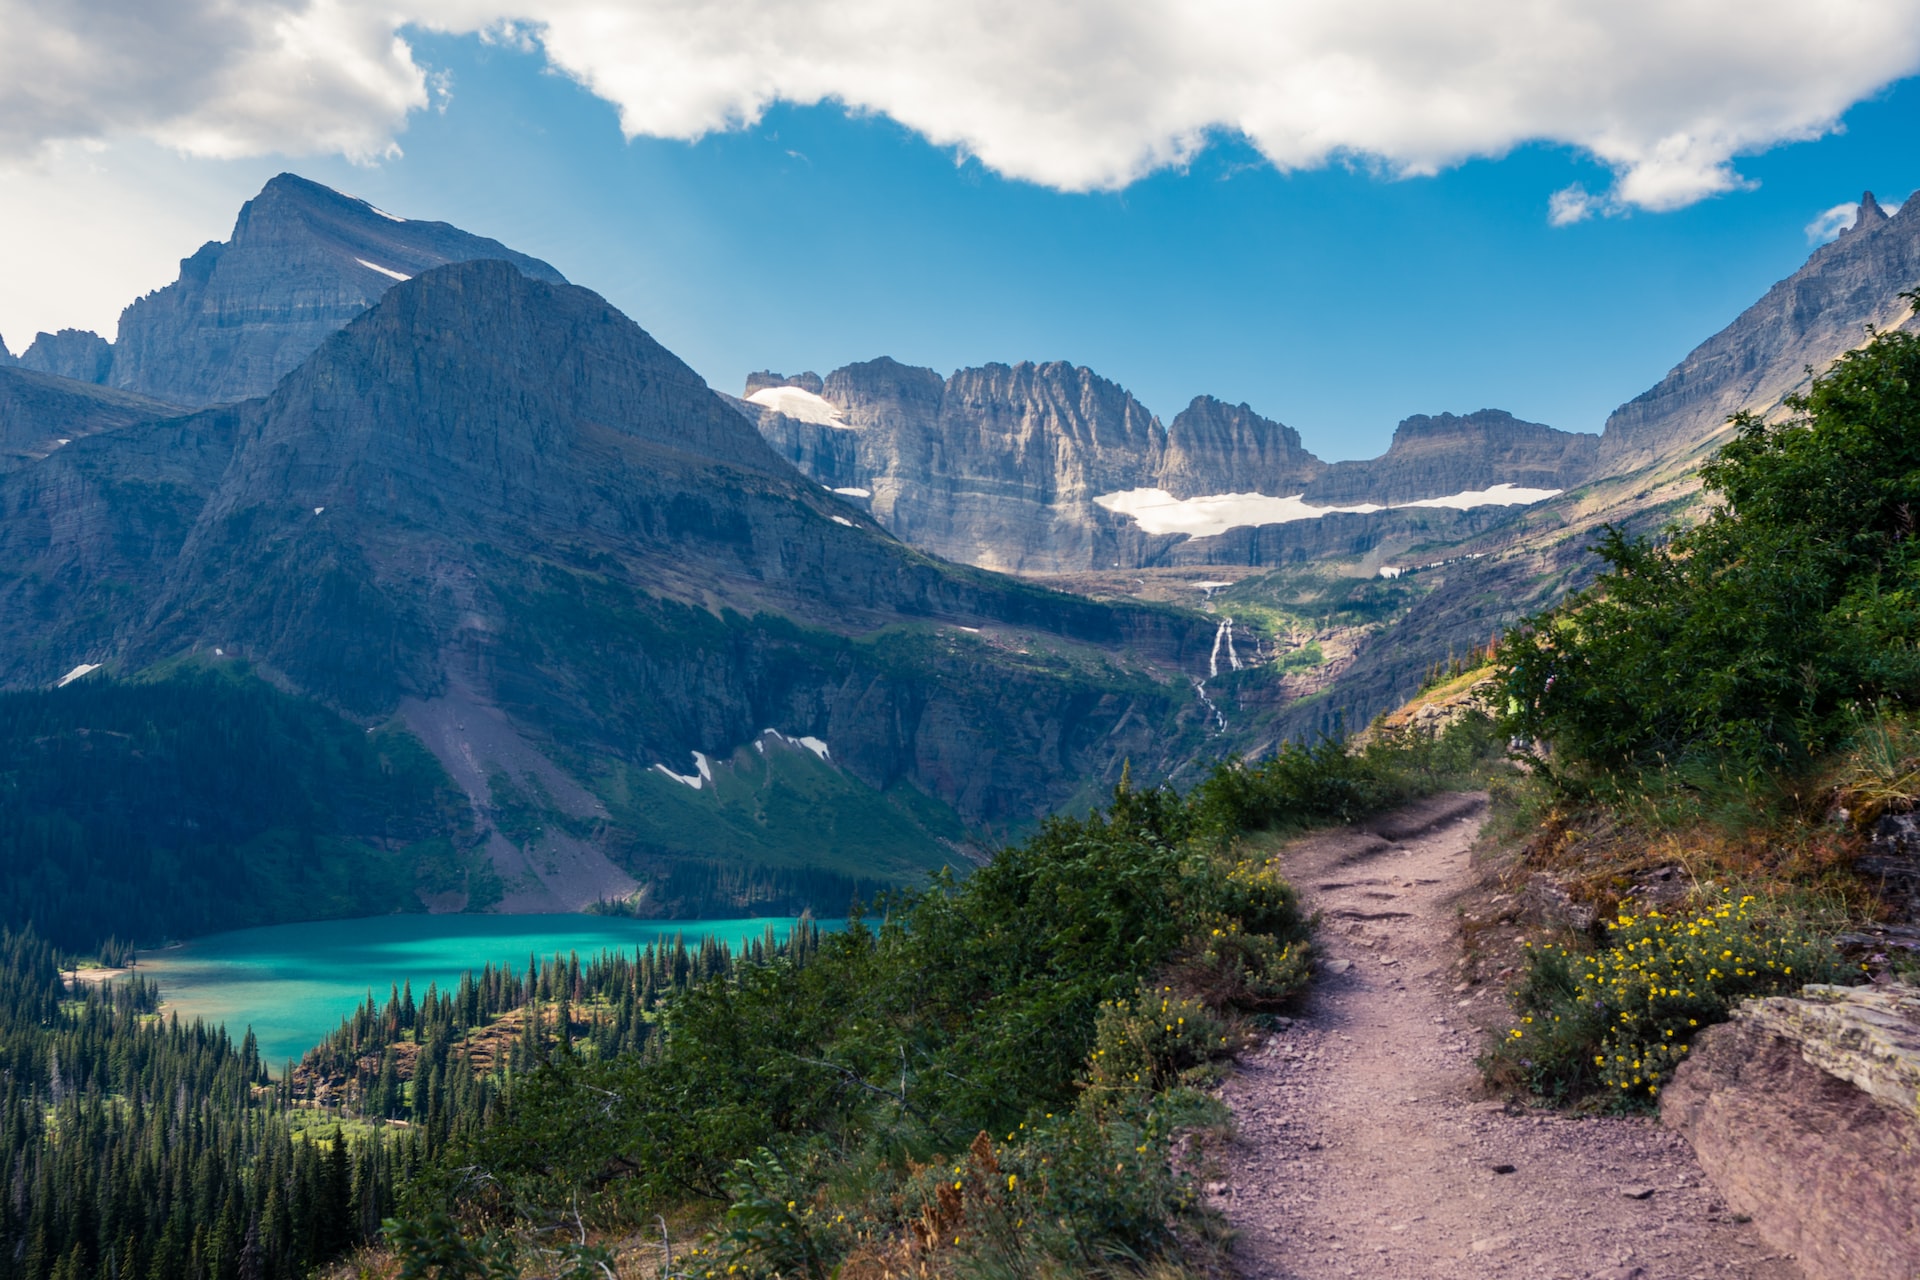 The Grinnell Glacier Hike takes you above the treeline and up to the mountains with turquoise water in a lake below.